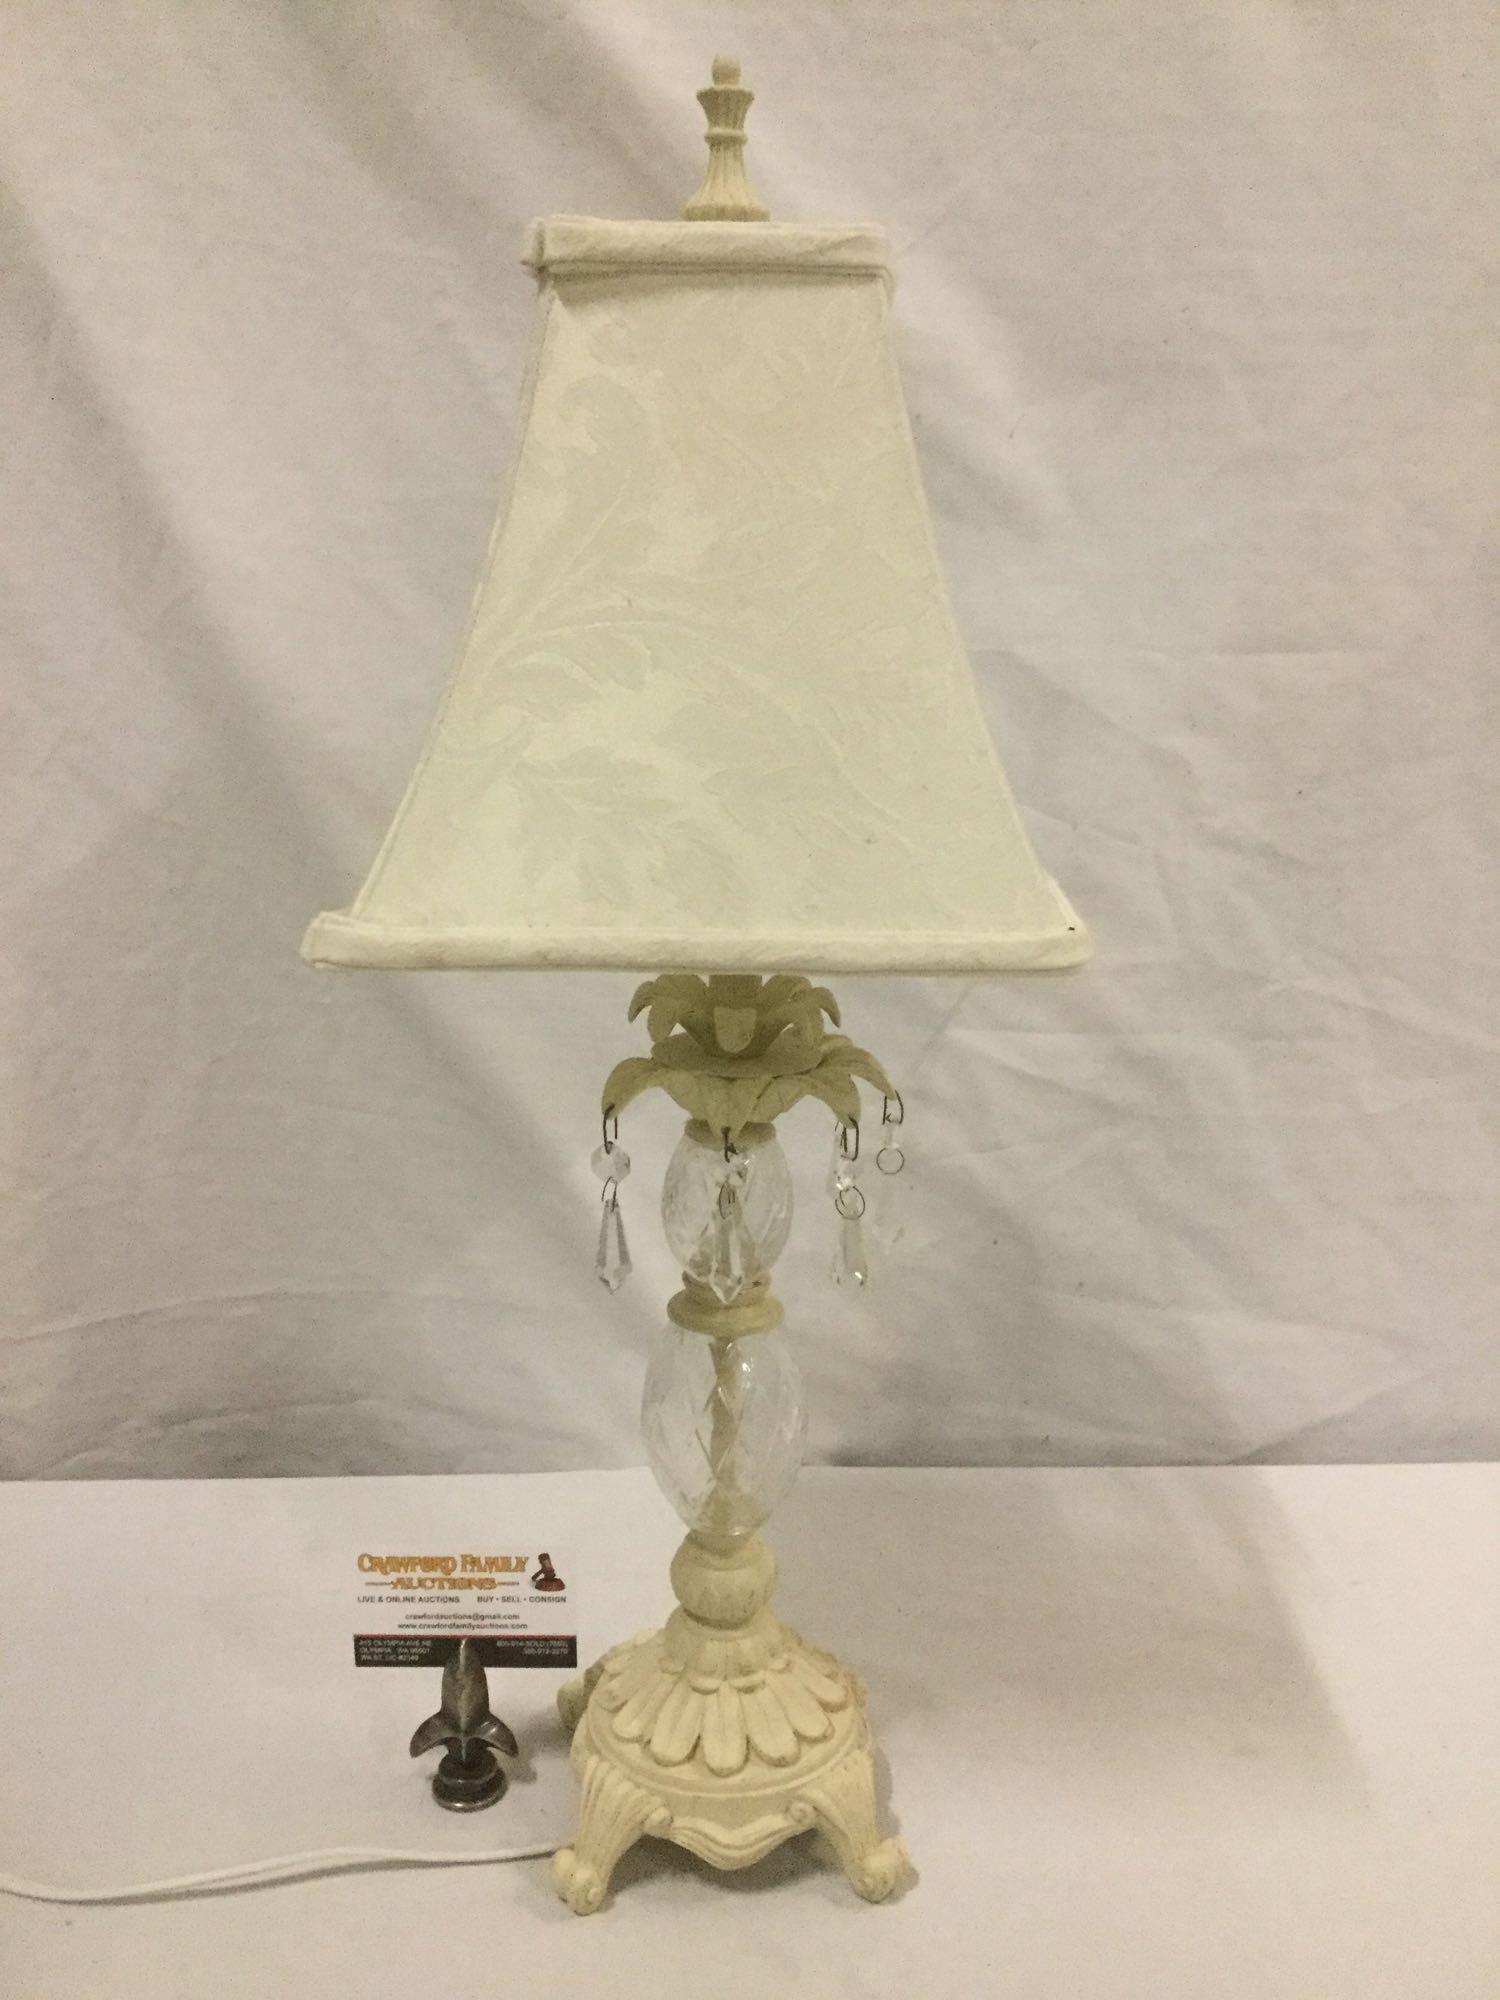 Modern antique style table lamp with white chic look and glass embellishments